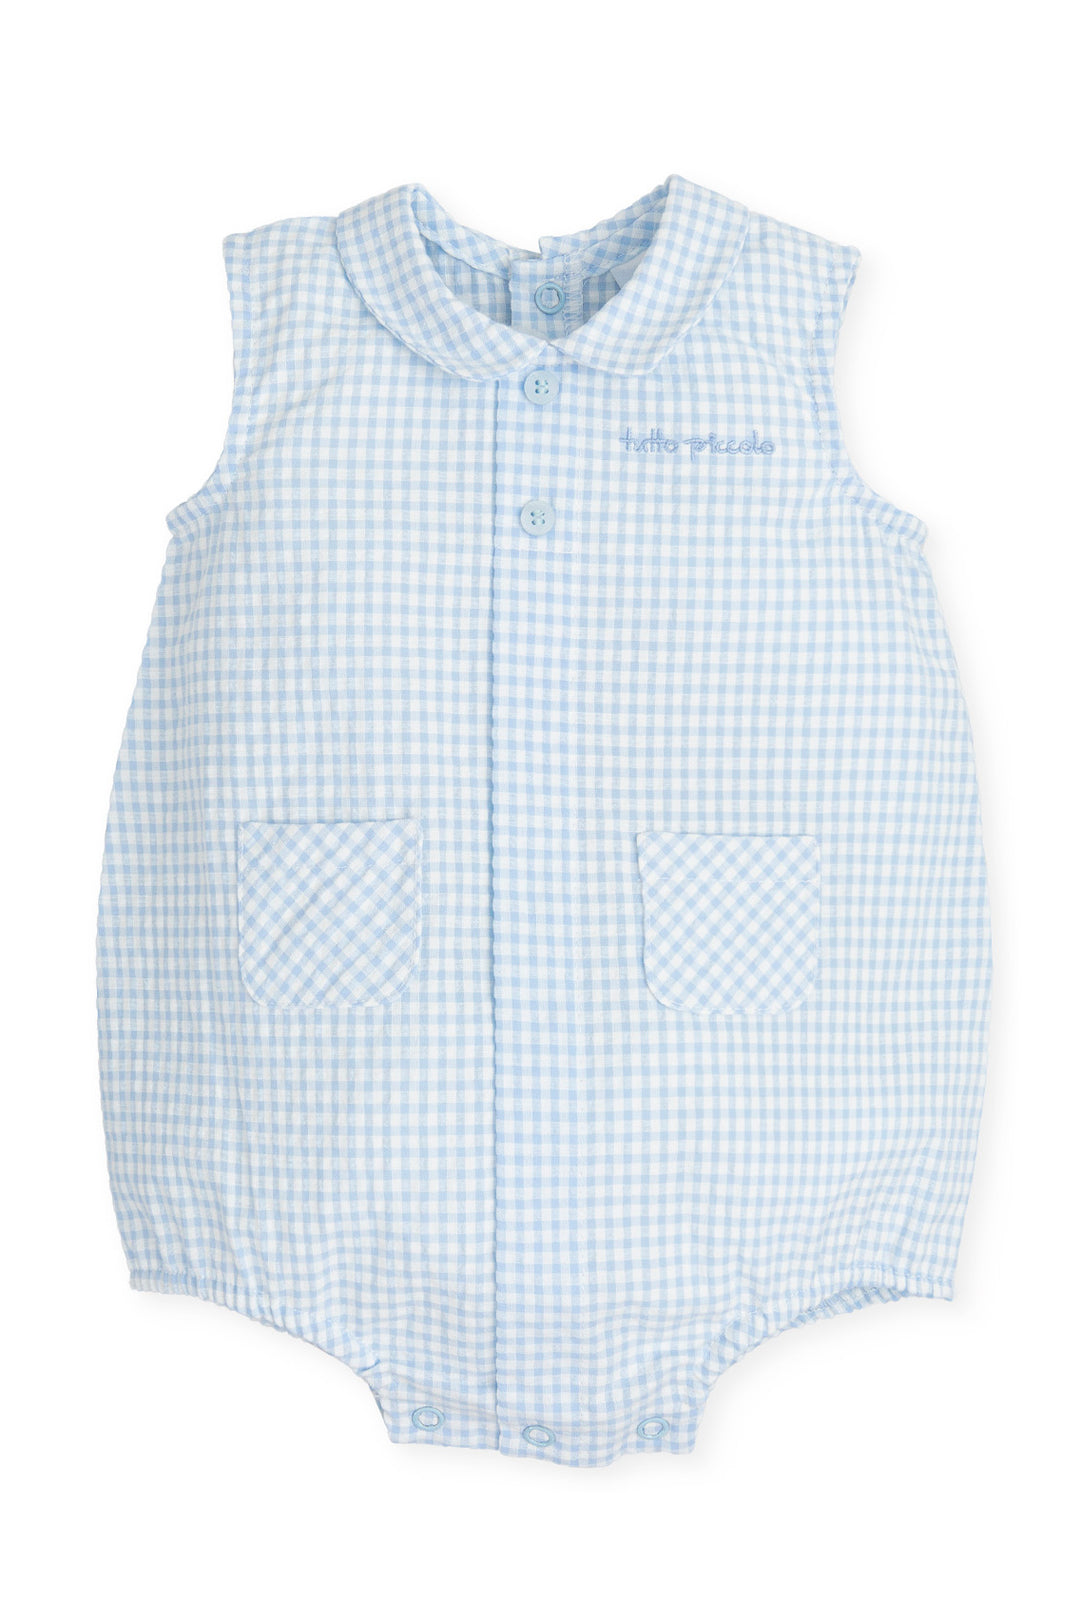 Tutto Piccolo "Harry" Blue Gingham Romper | iphoneandroidapplications